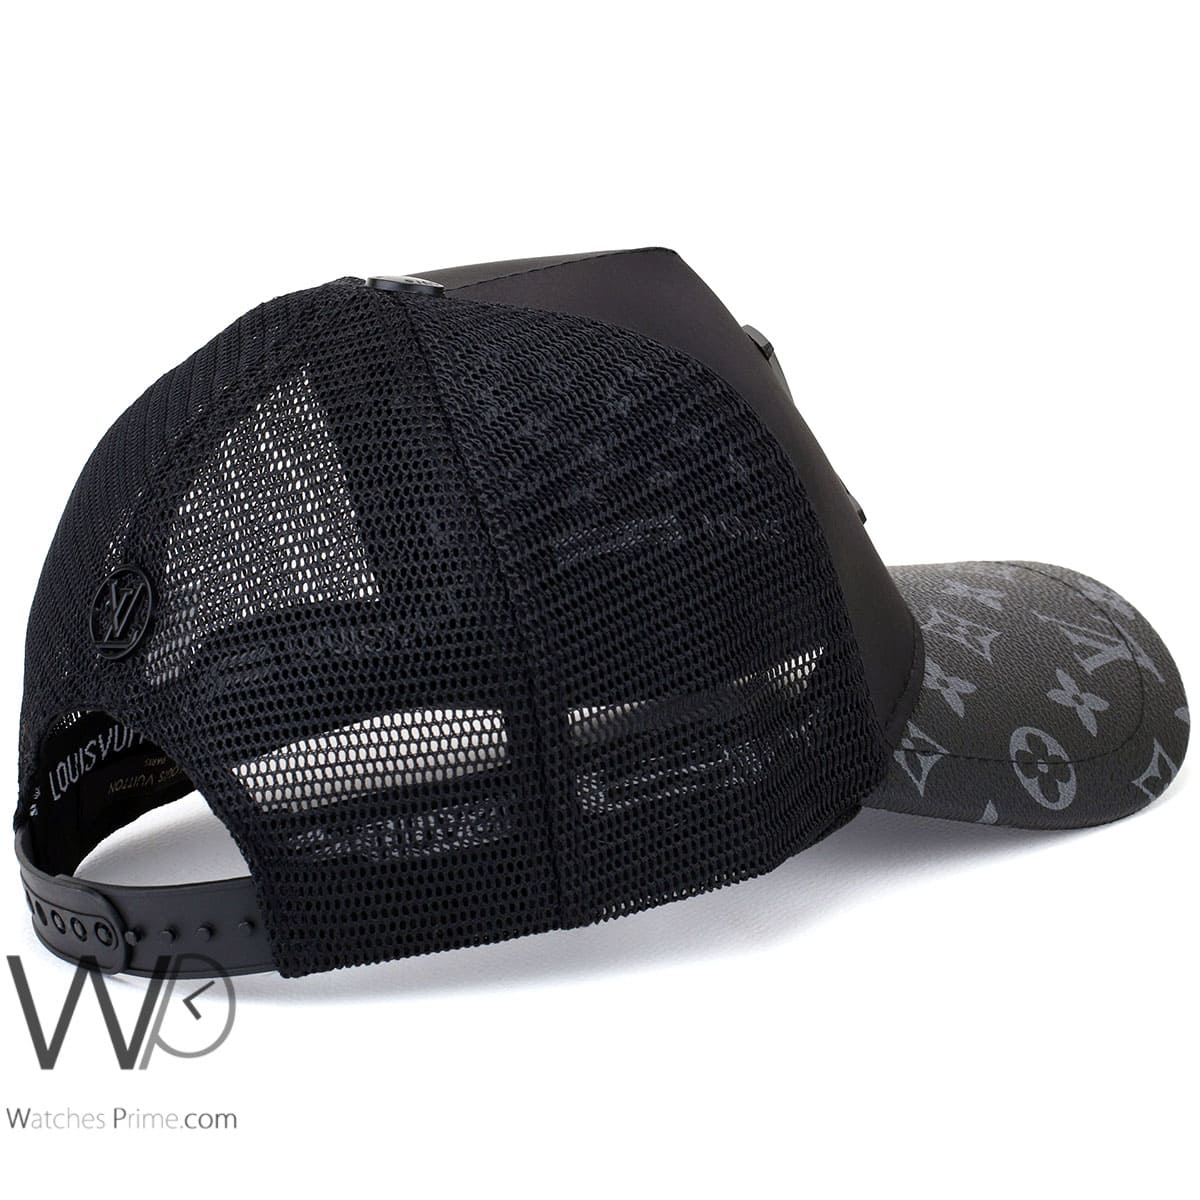 Black Trucker Hat With LV Patch Adjustable Snapback New